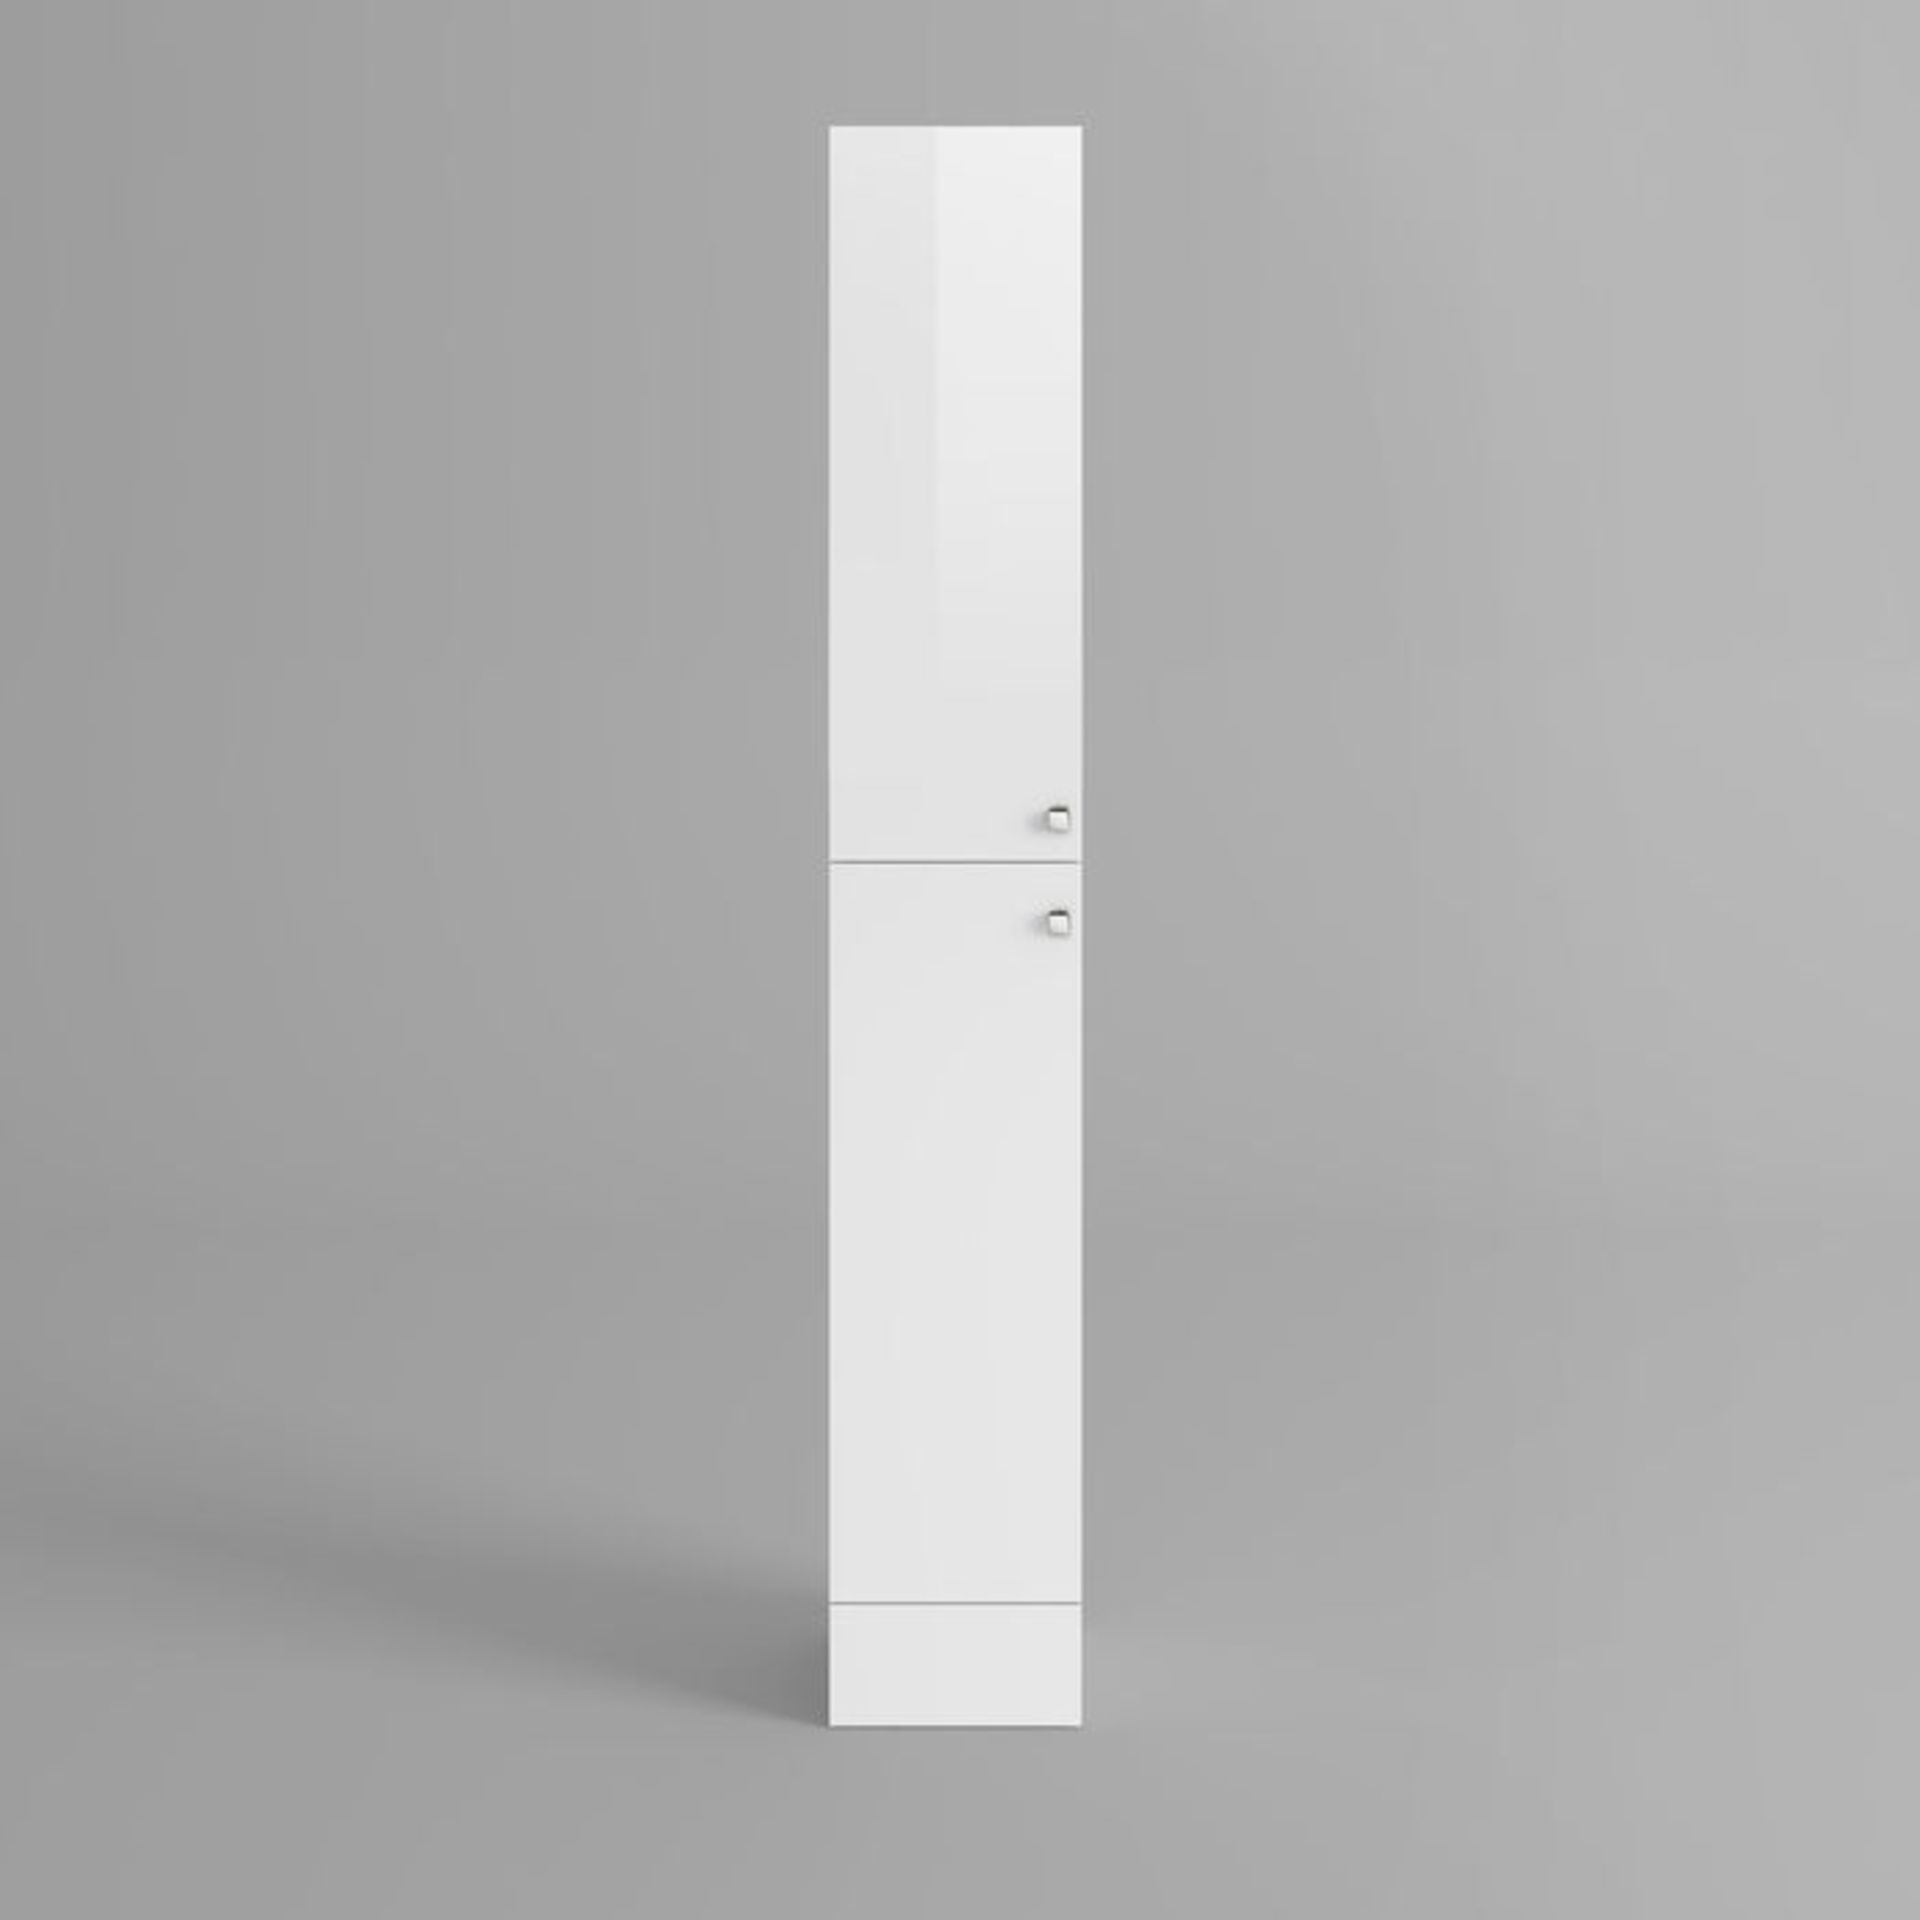 (ZA100) 1900x300mm Harper Gloss White Tall Storage Cabinet - Floor Standing. RRP £179.99. Our tall - Image 5 of 5